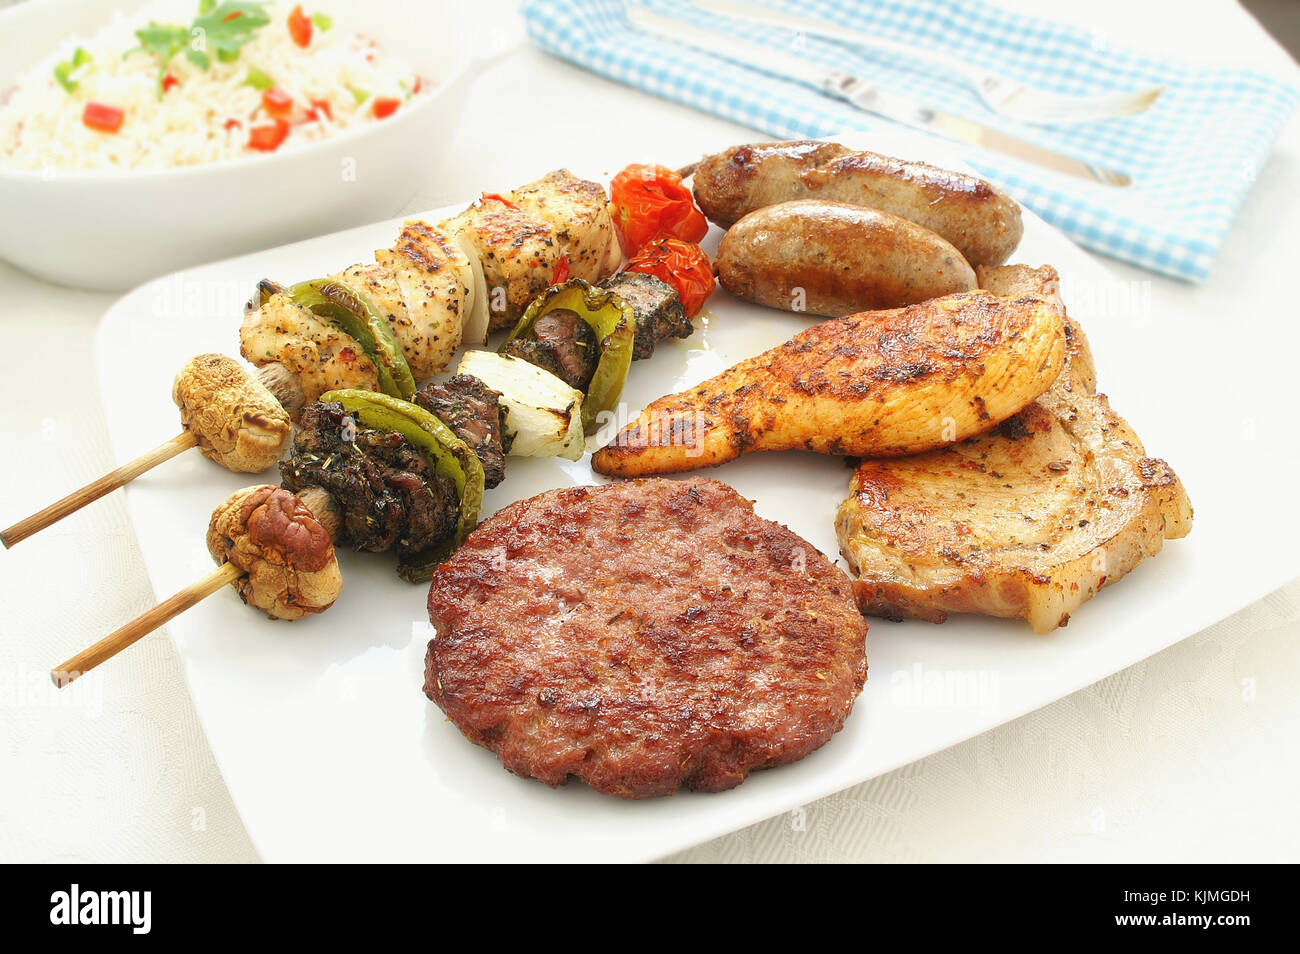 Barbecue Meat Selection Plated Meal Stock Photo